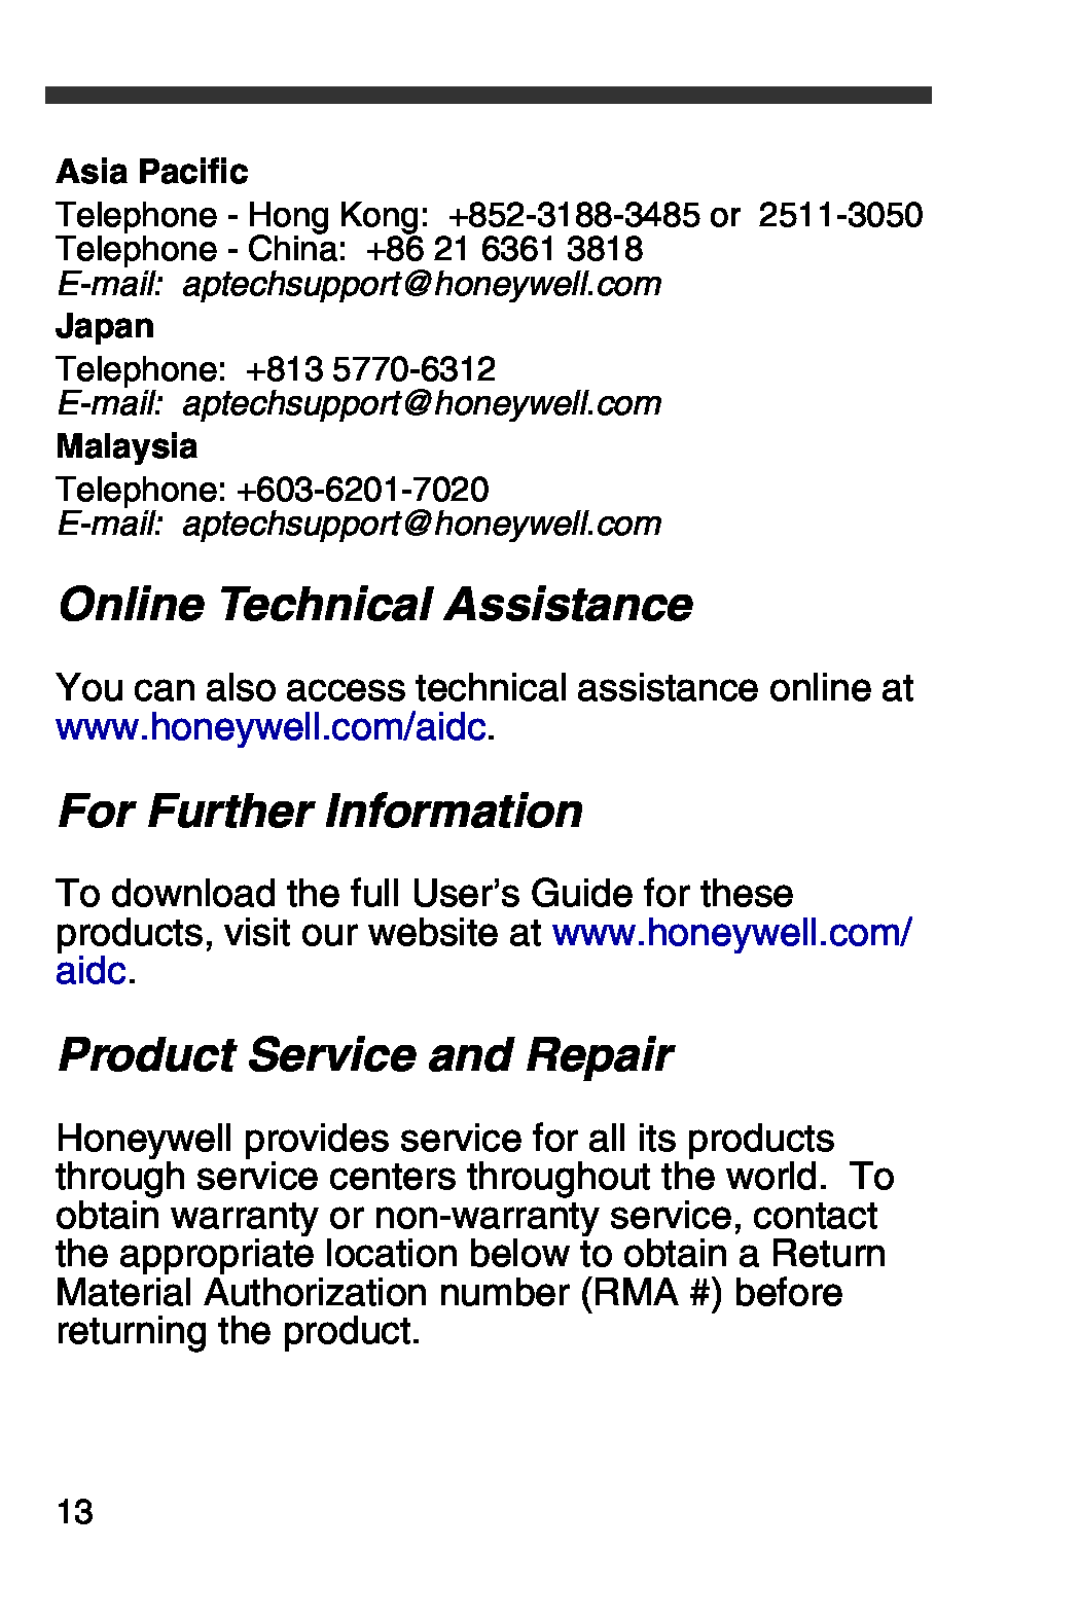 Honeywell 4600rp Online Technical Assistance, For Further Information, Product Service and Repair, Asia Pacific, Japan 